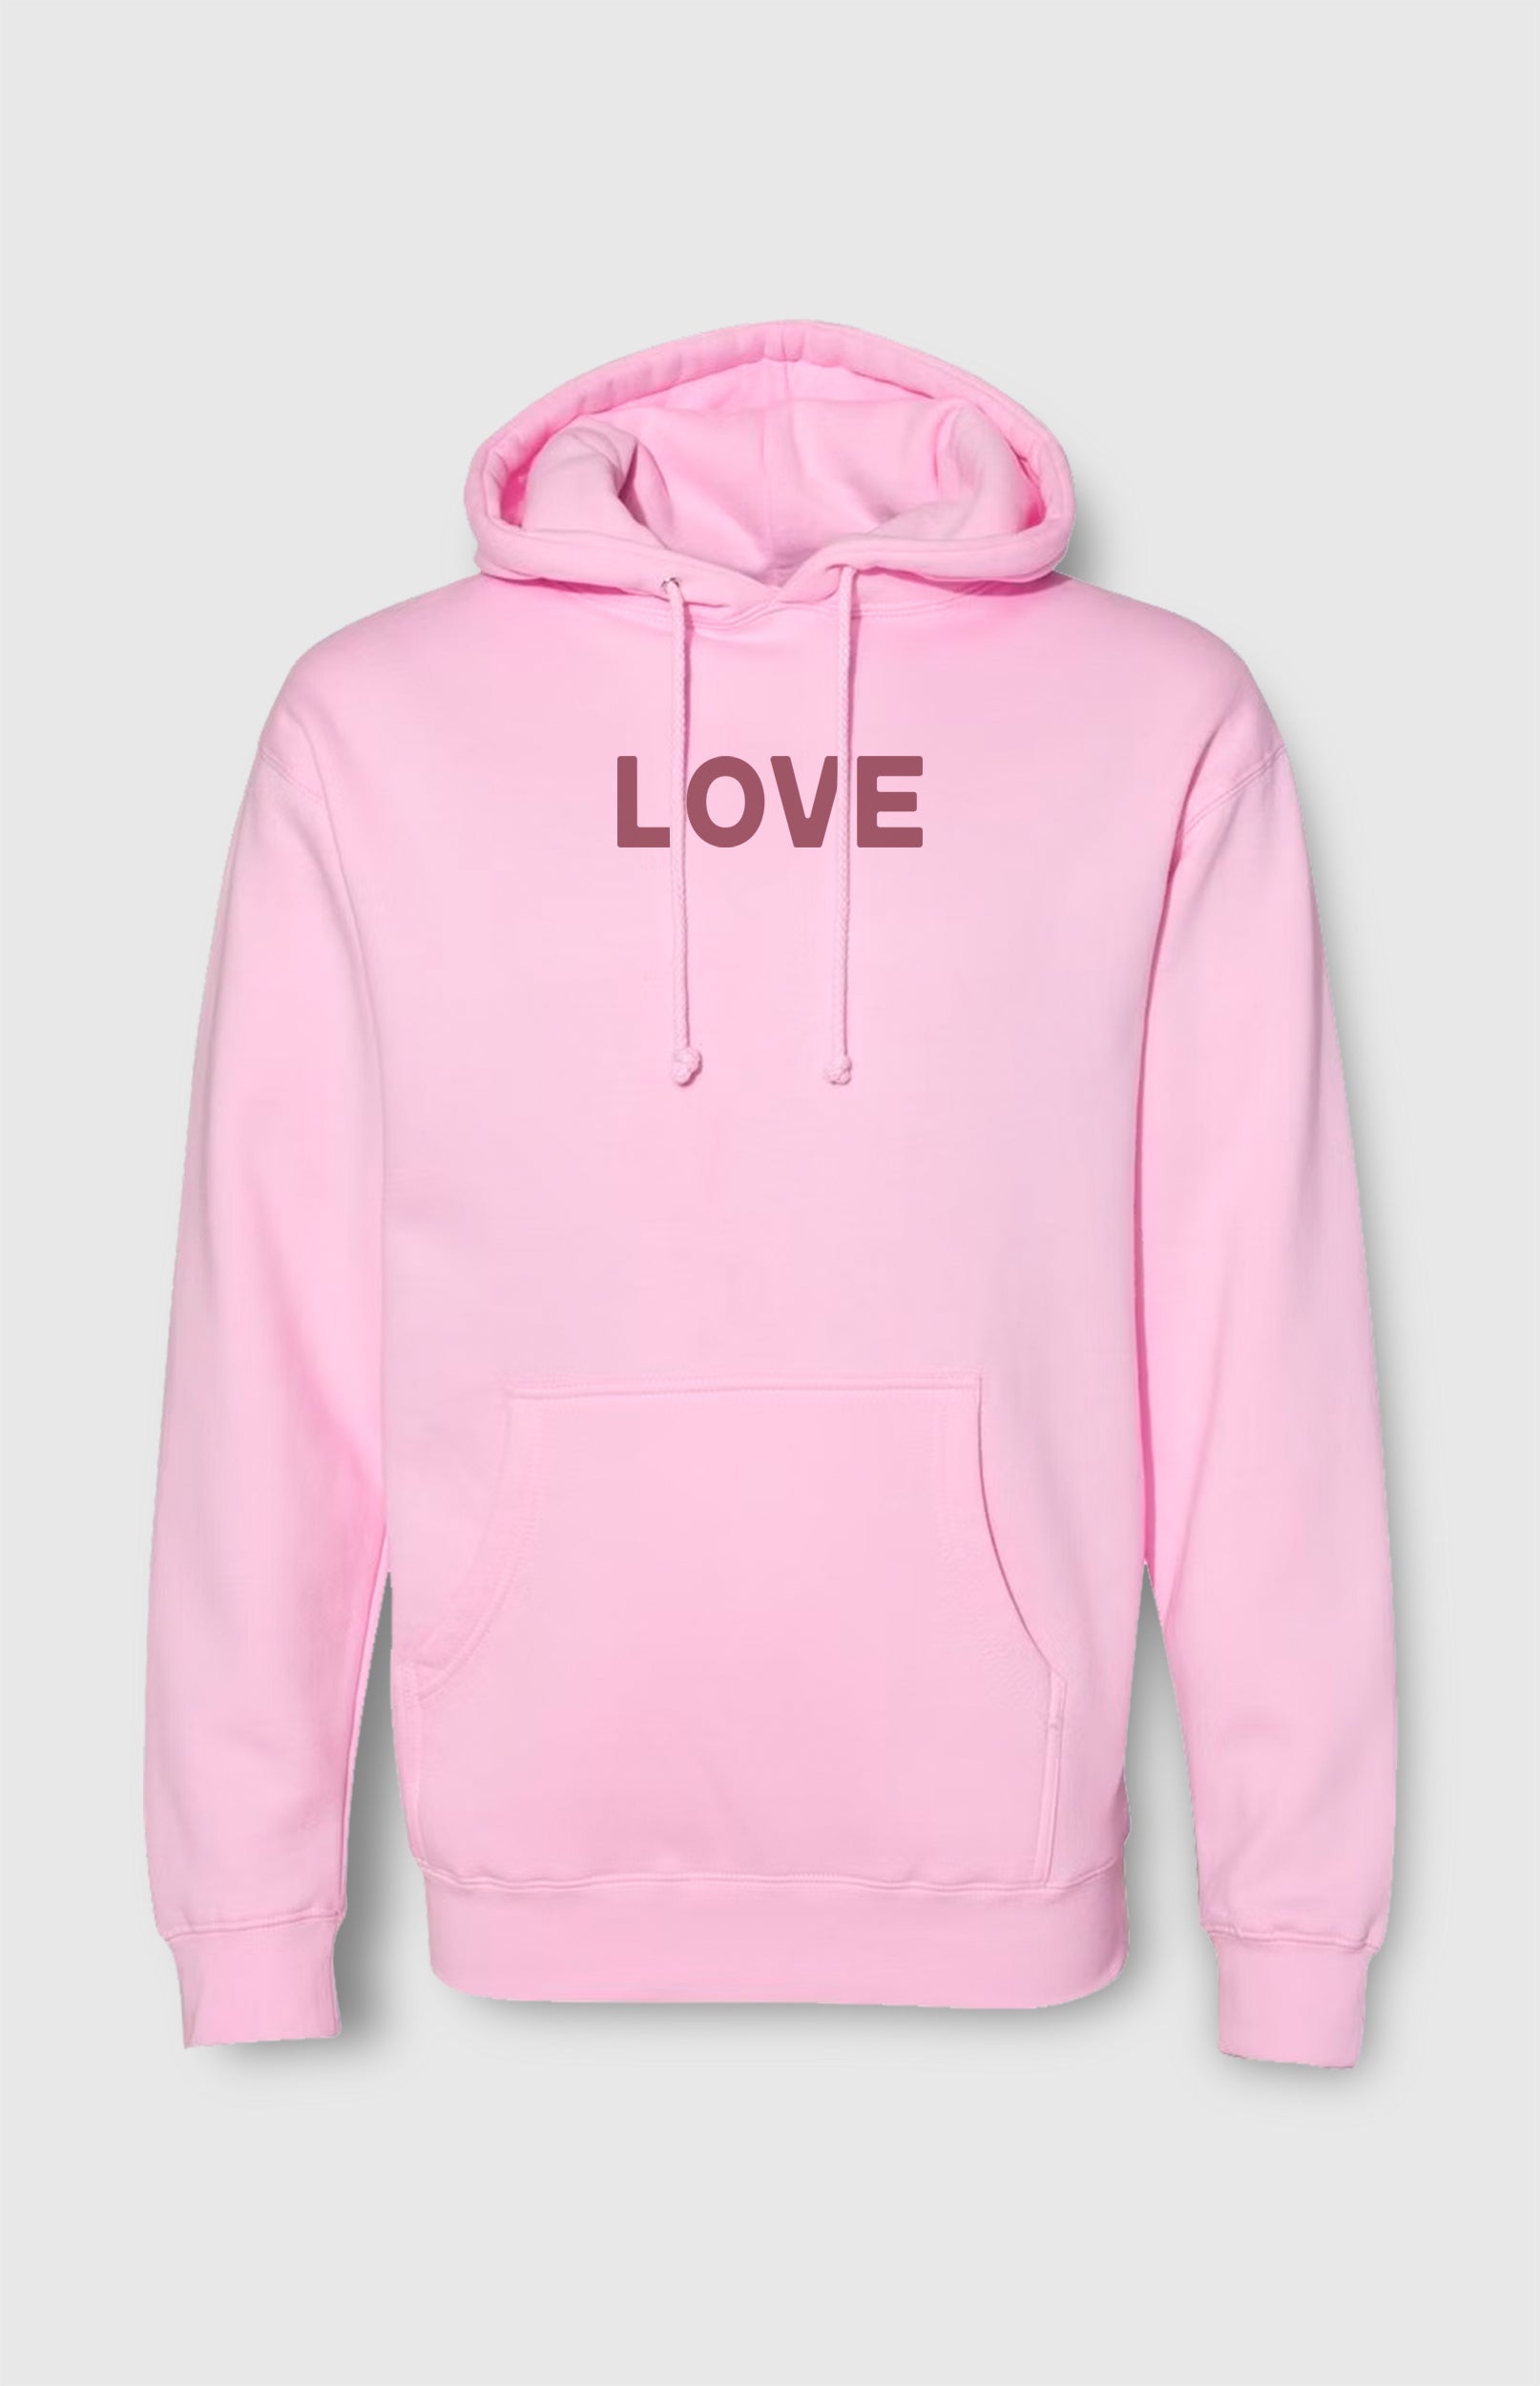 Love Hoodie – Values Driven